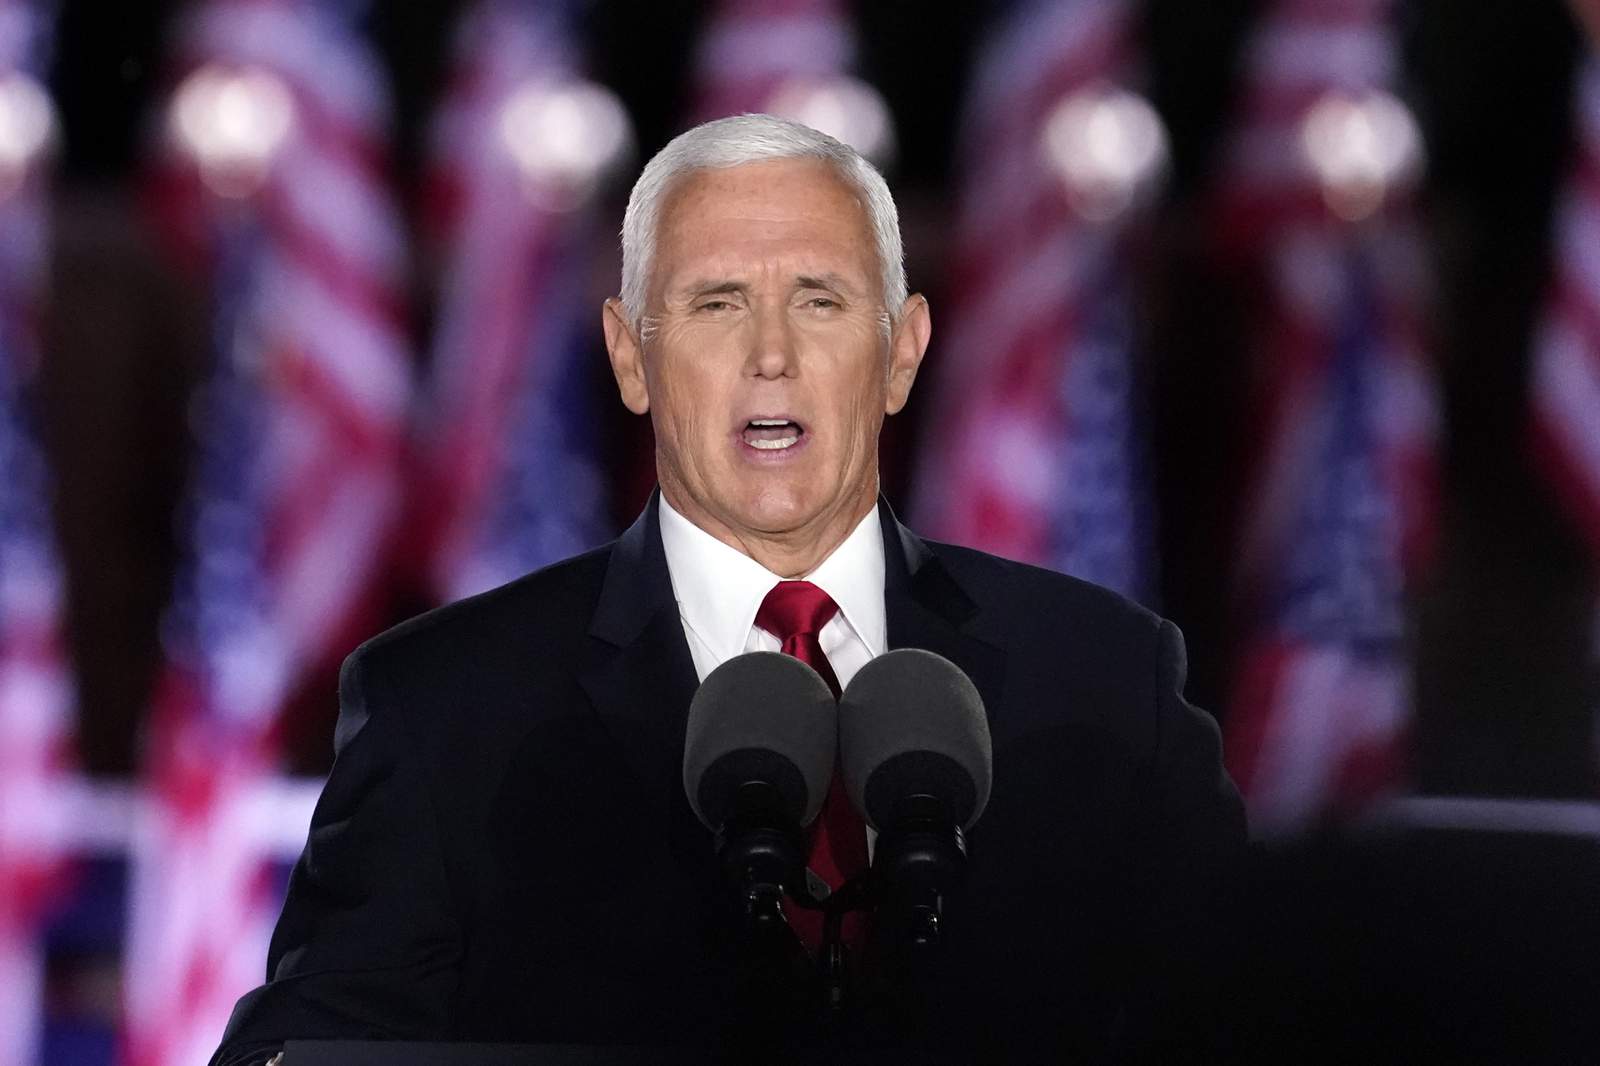 Private Wisconsin college cancels VP Pence commencement speech